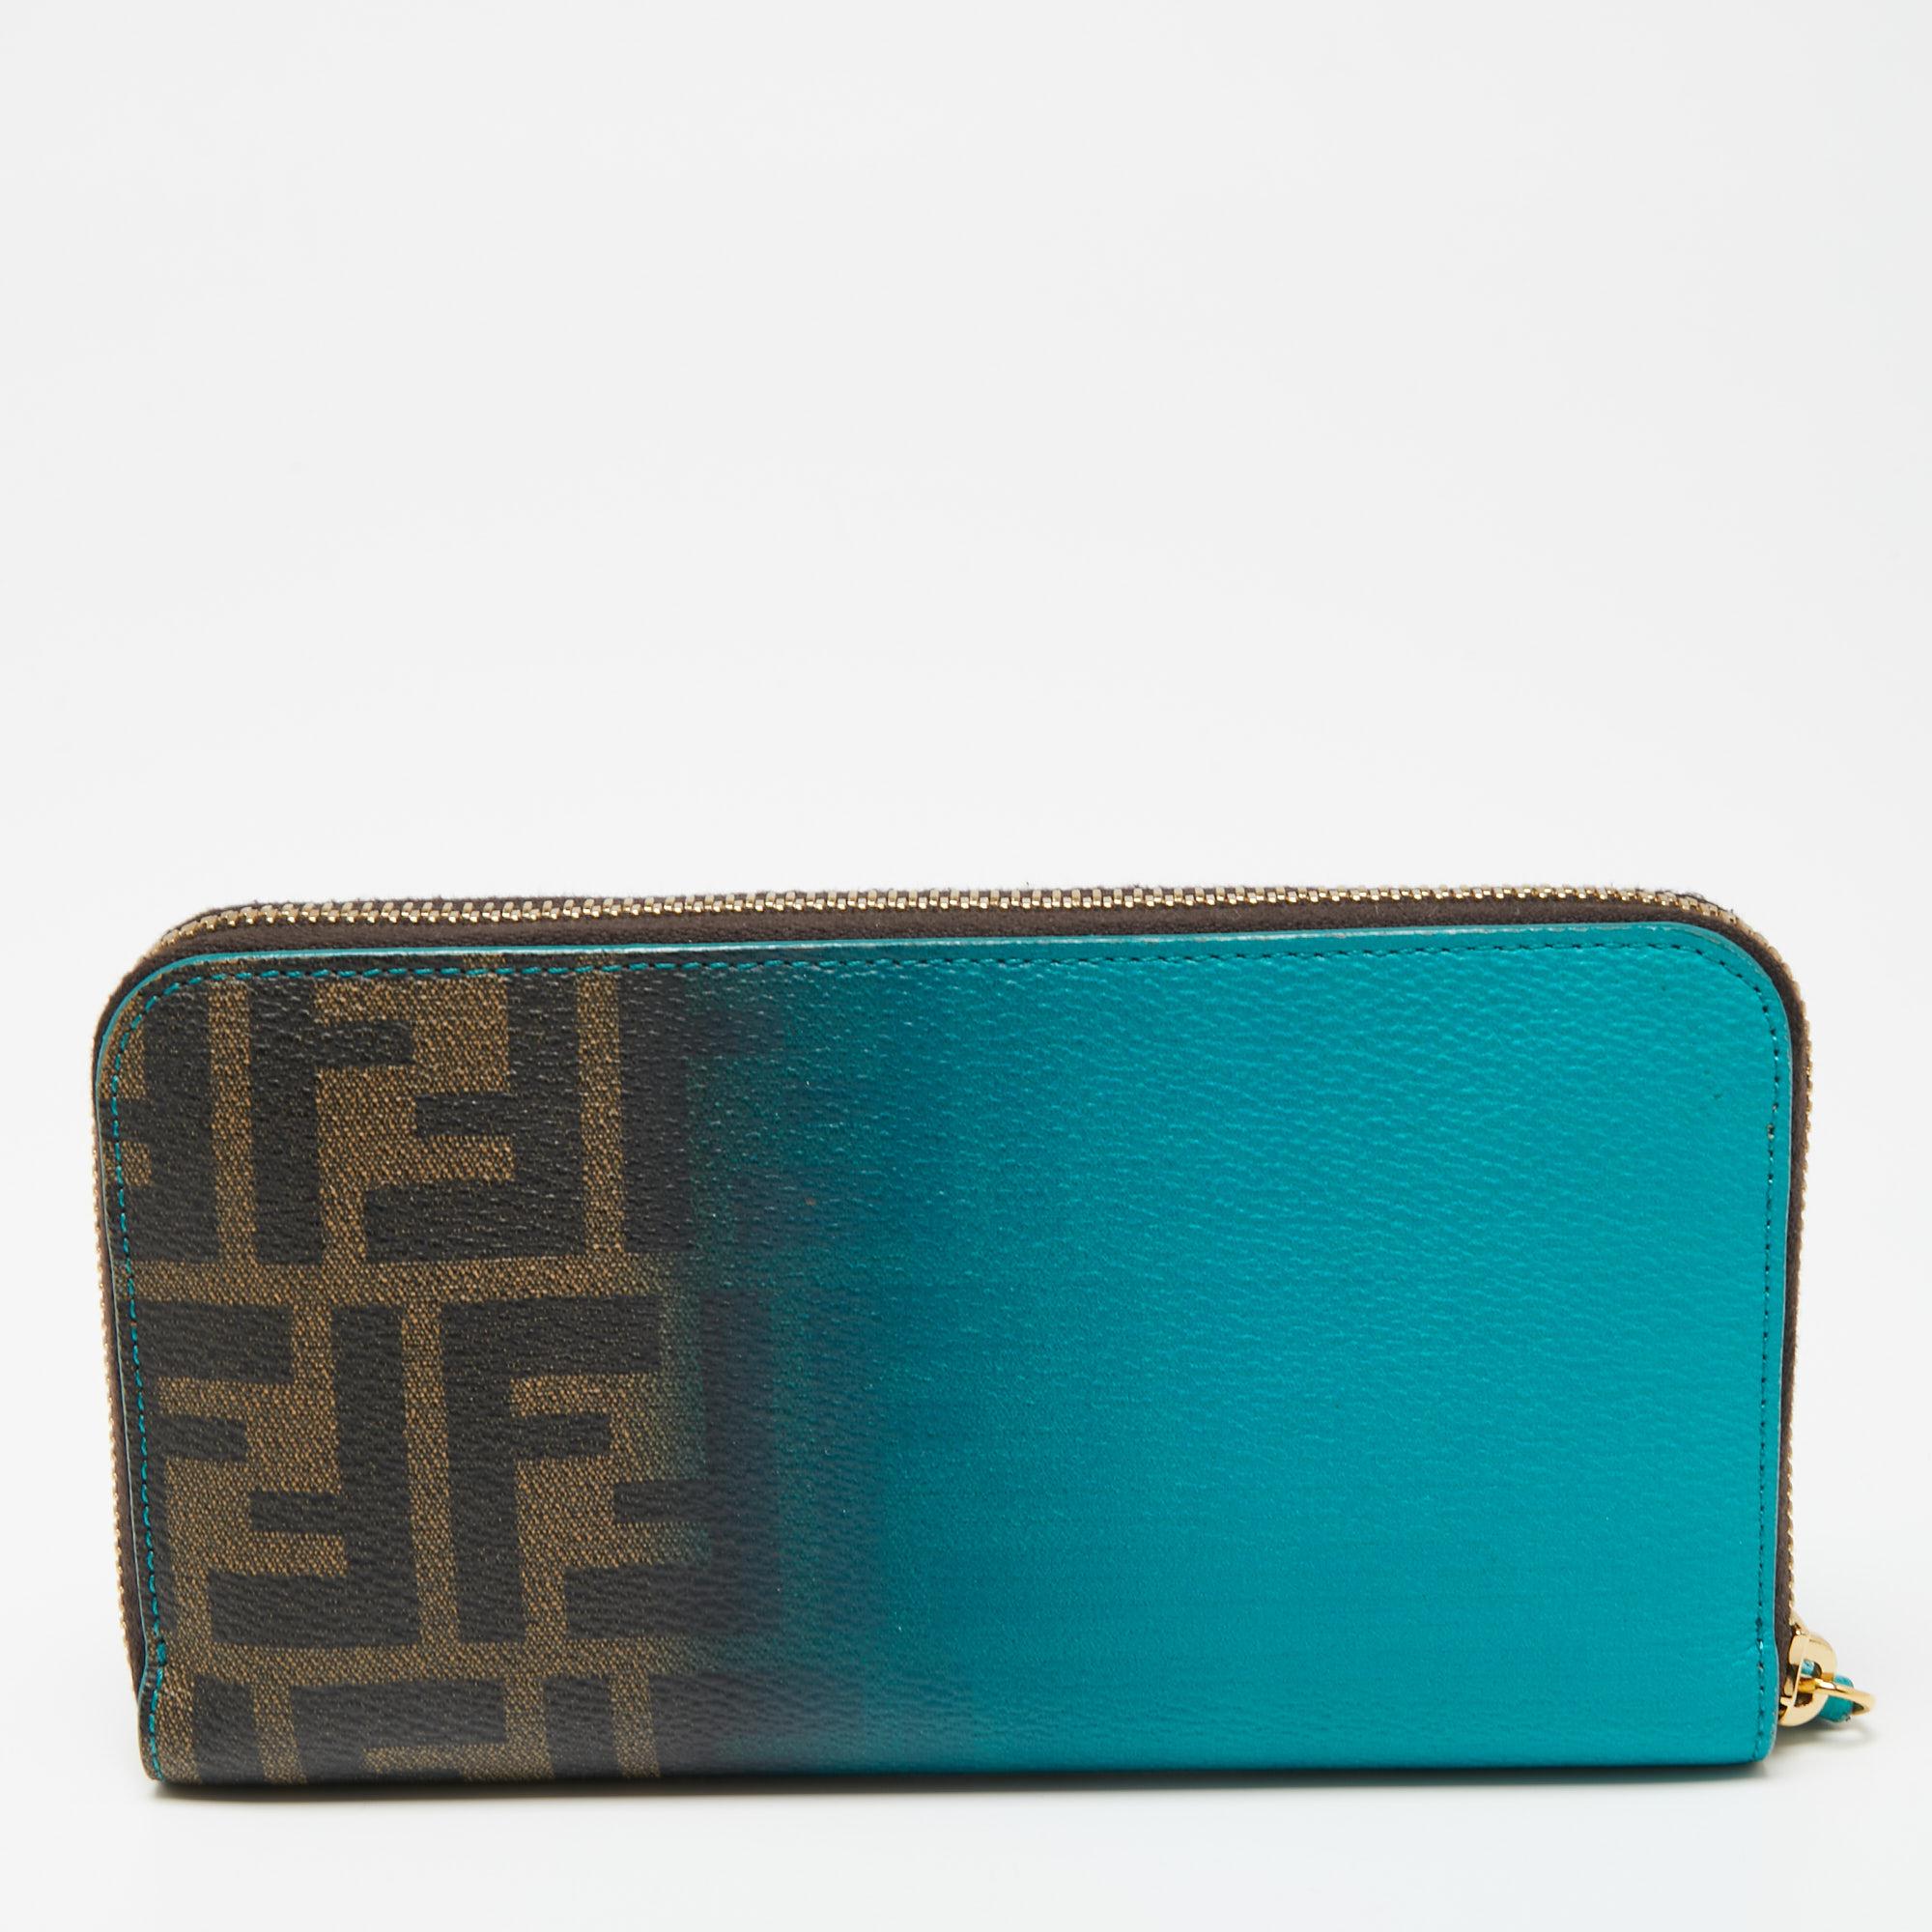 Add this classy Fendi wallet to your wardrobe and carry all your monetary essentials in style. It features a green ombre Zucca coated canvas exterior. The leather and fabric interior features multiple card slots and a zipped compartment. This piece